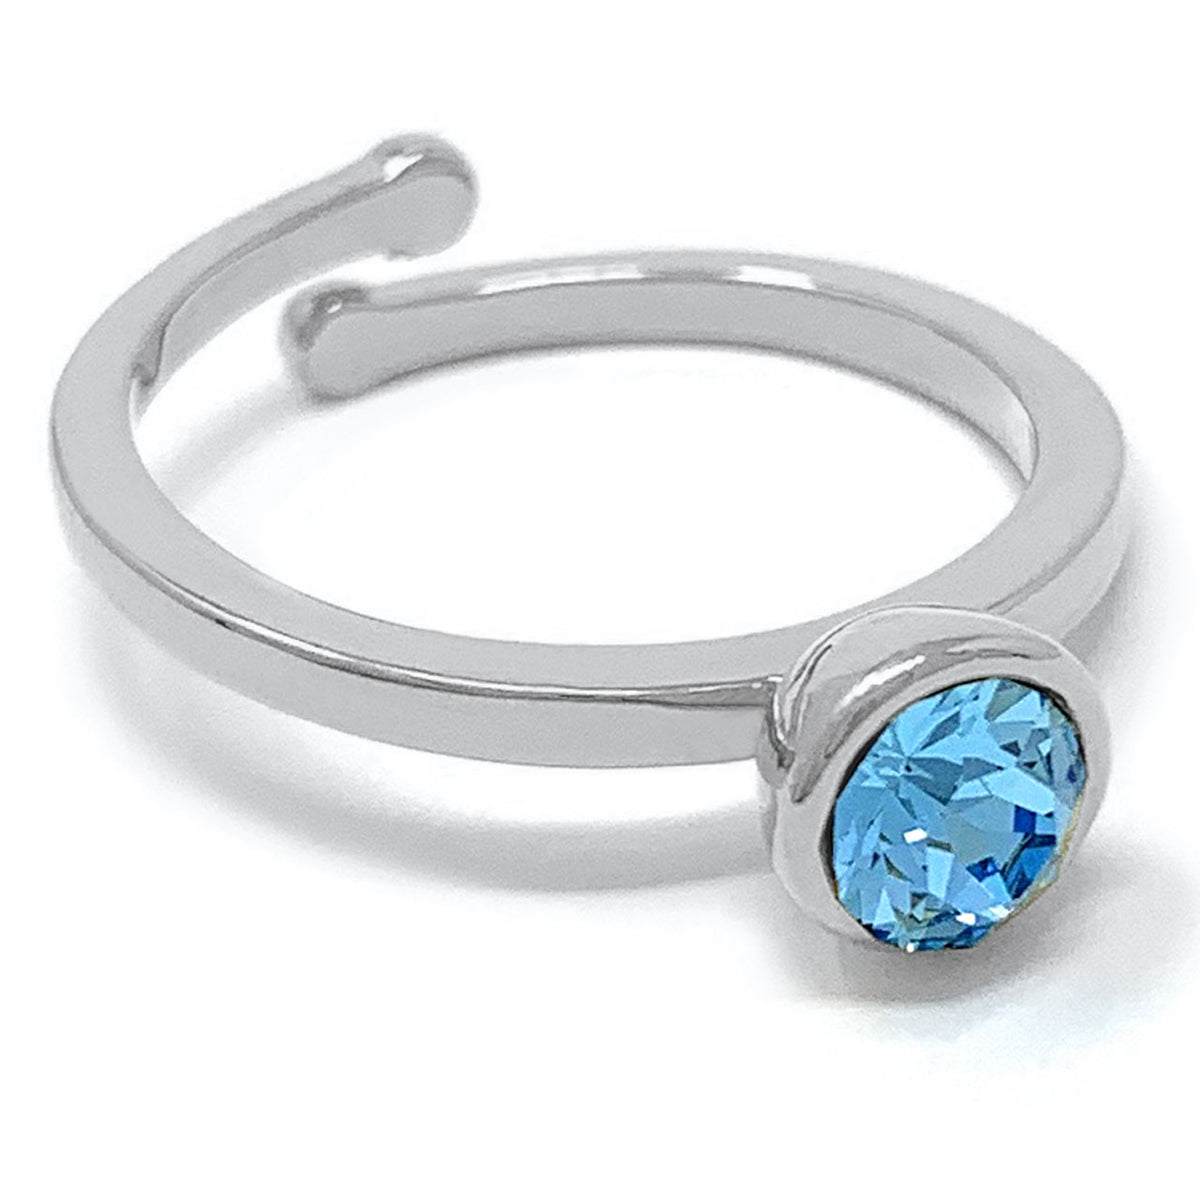 Harley Adjustable Ring with Blue Aquamarine Round Crystals from Swarovski Silver Toned Rhodium Plated - Ed Heart